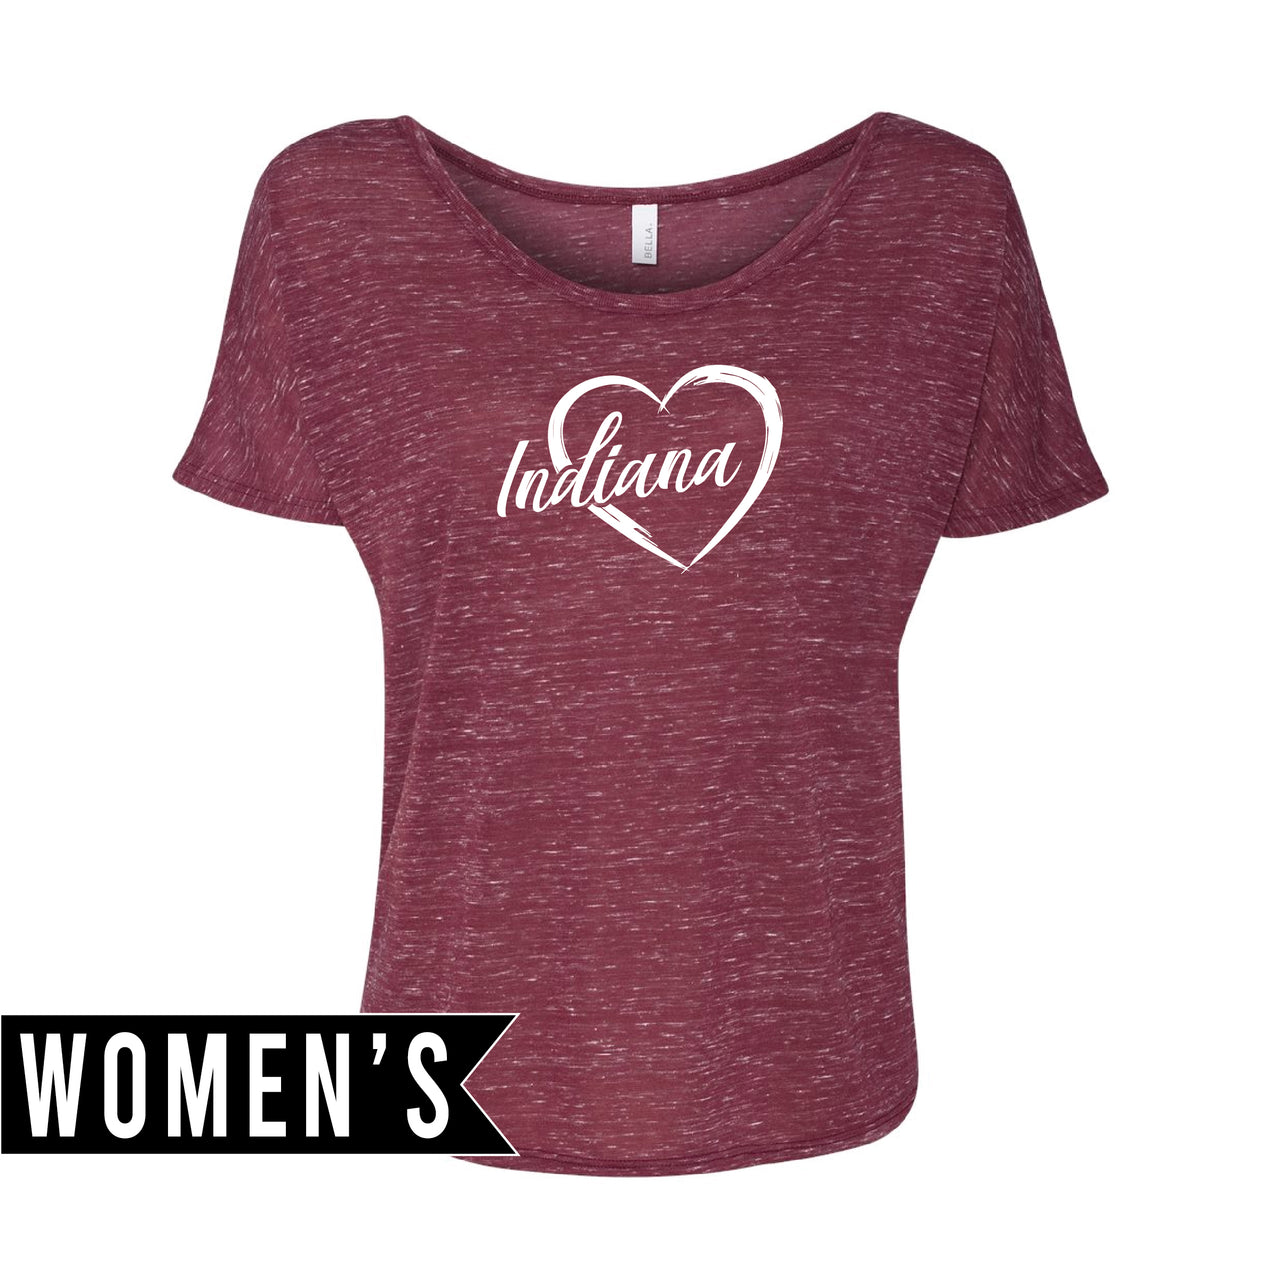 BELLA + CANVAS - Women’s Slouchy Tee - Indiana